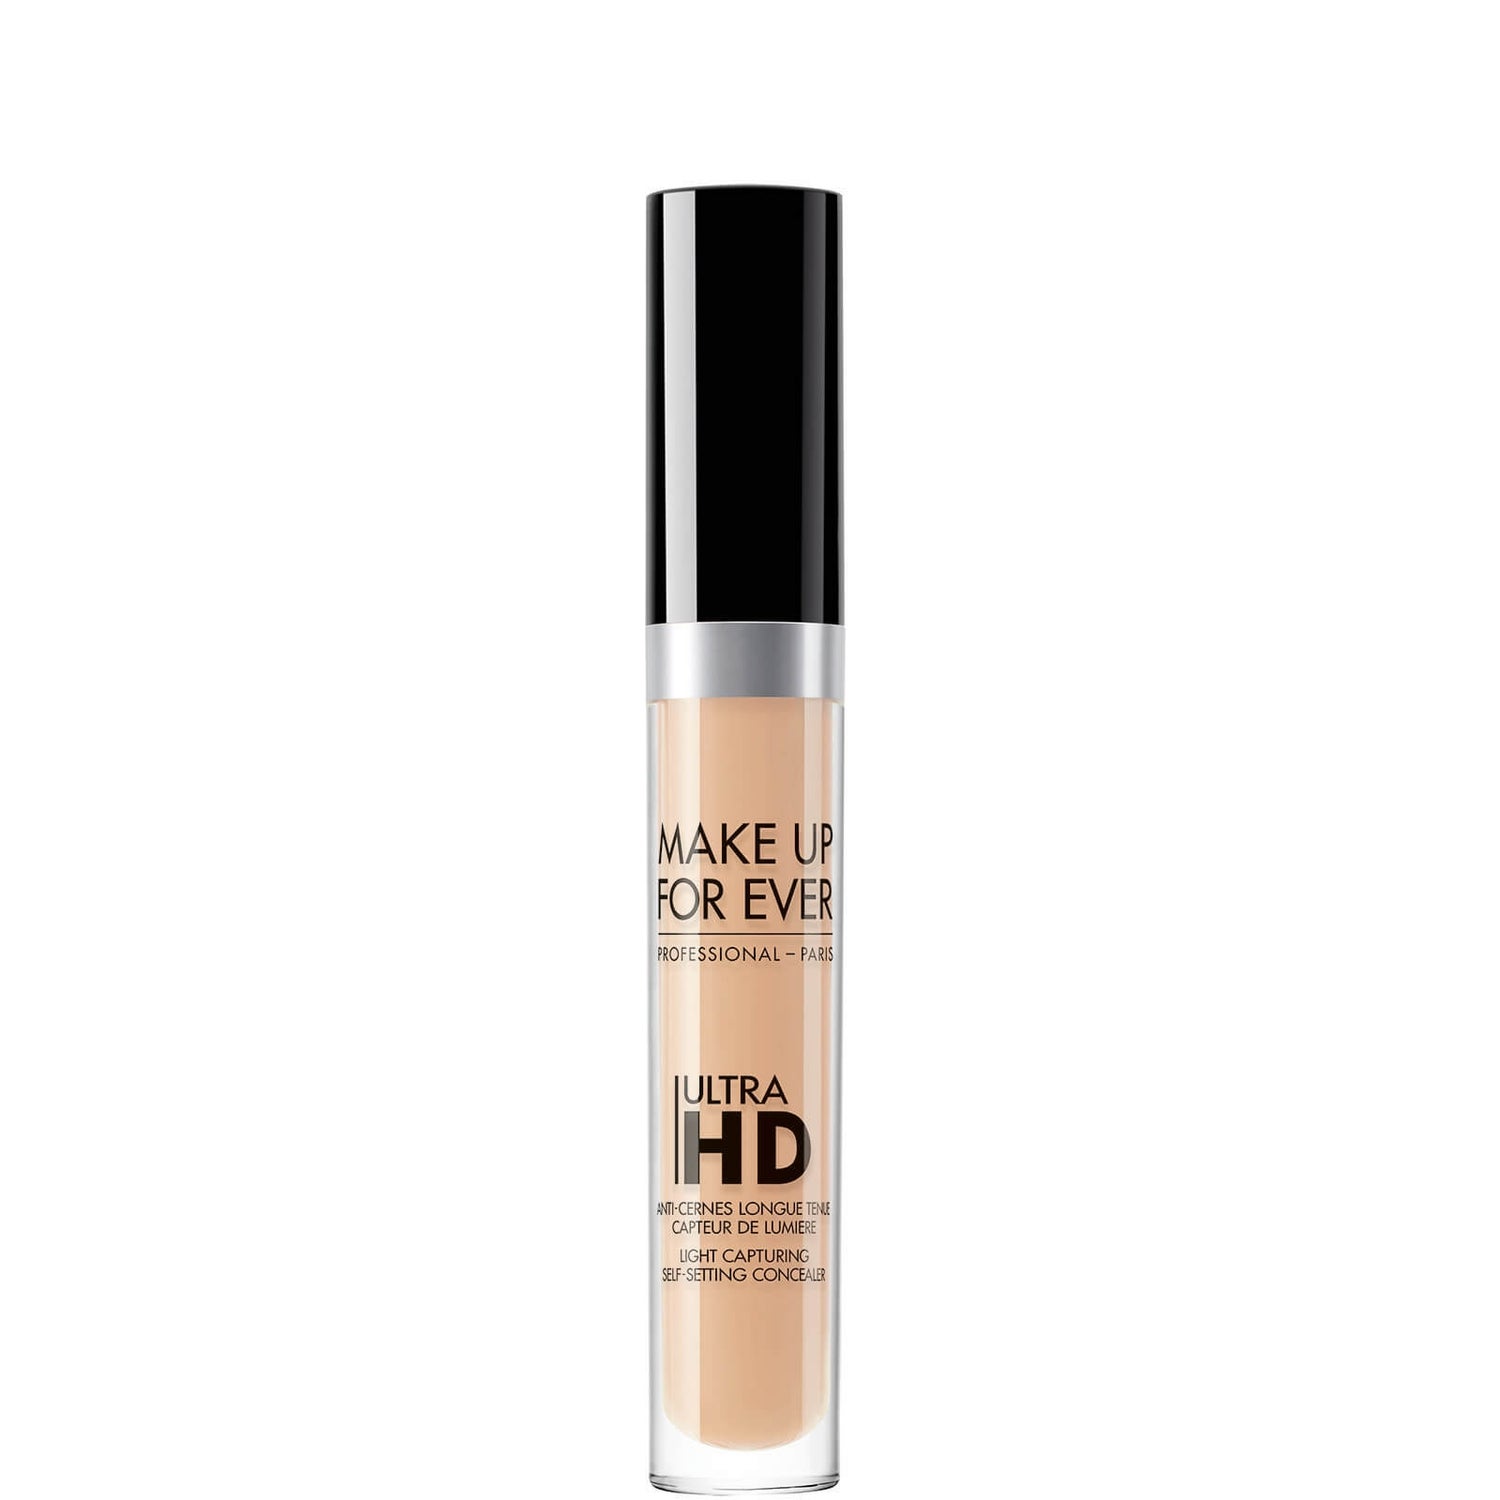 MAKE UP FOR EVER ultra Hd Self-Setting Concealer 5ml (Various Shades) -